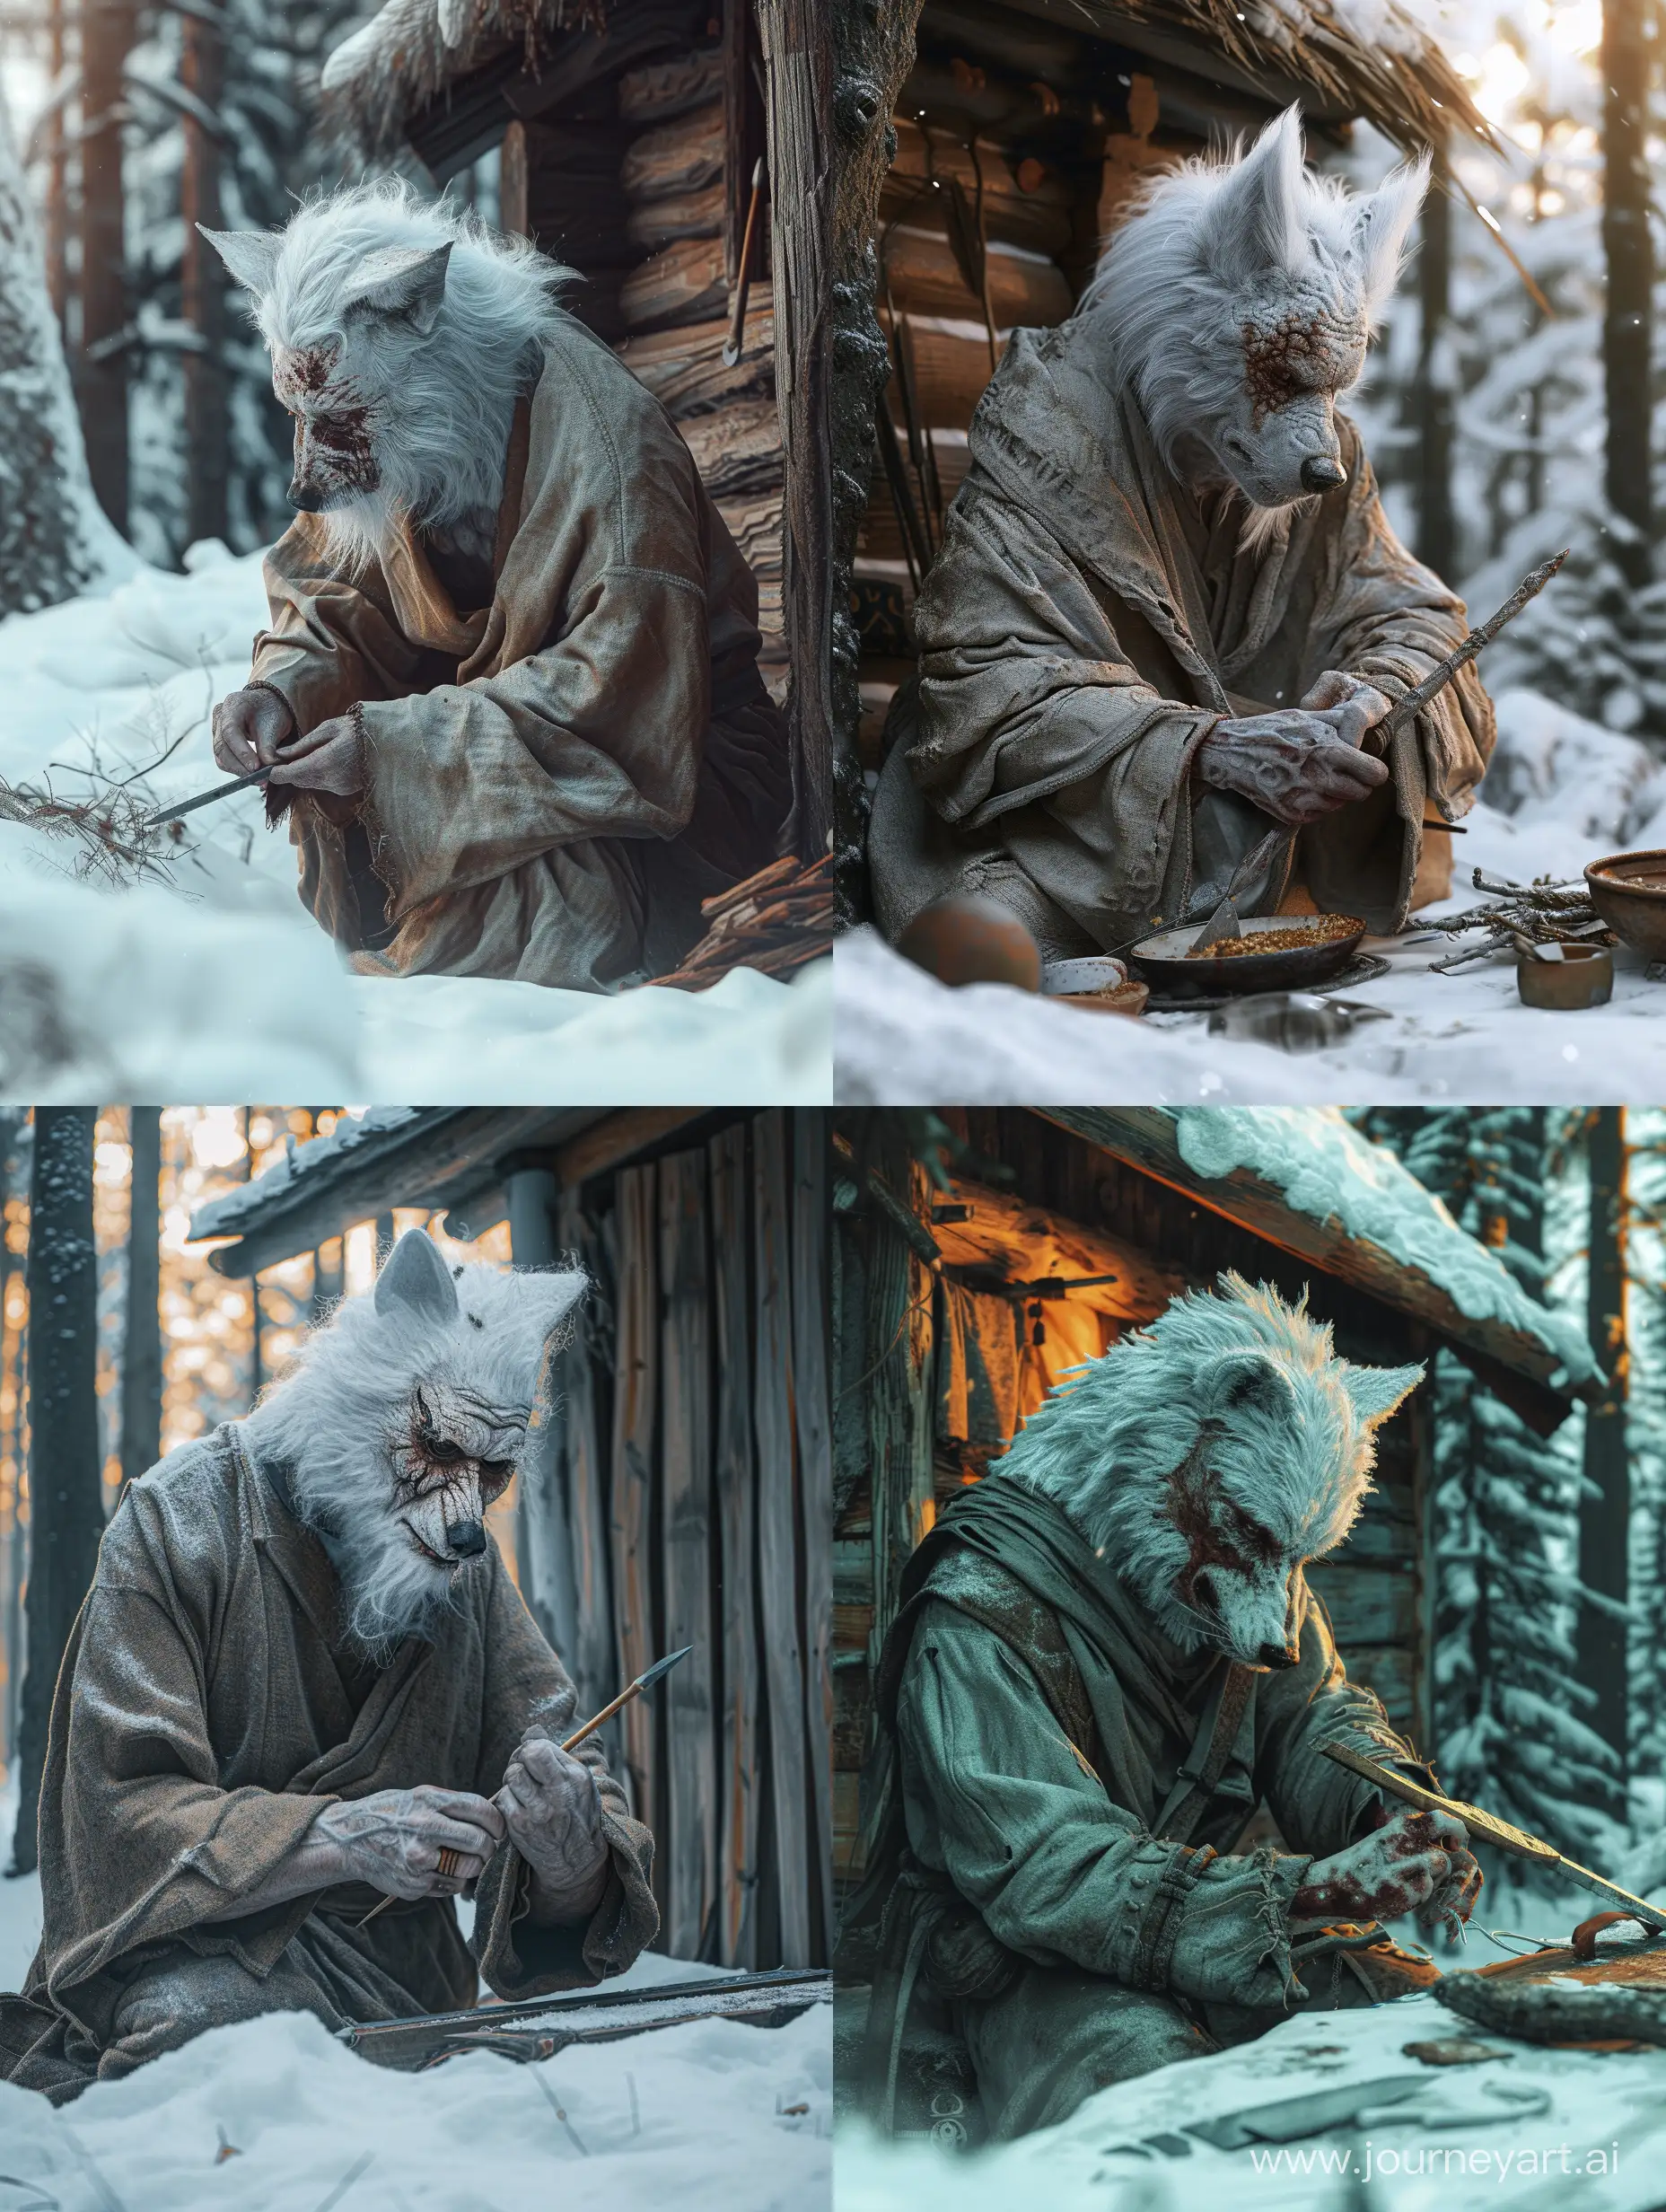 A wise warrior with wolf's head and human body called " lonely wolf ",white,A big old wound on face,wearing a robe,in snowy forest,Next to the wooden hut,He is making a spear with a knife,Detailed clothing.incredible detail,warm light.